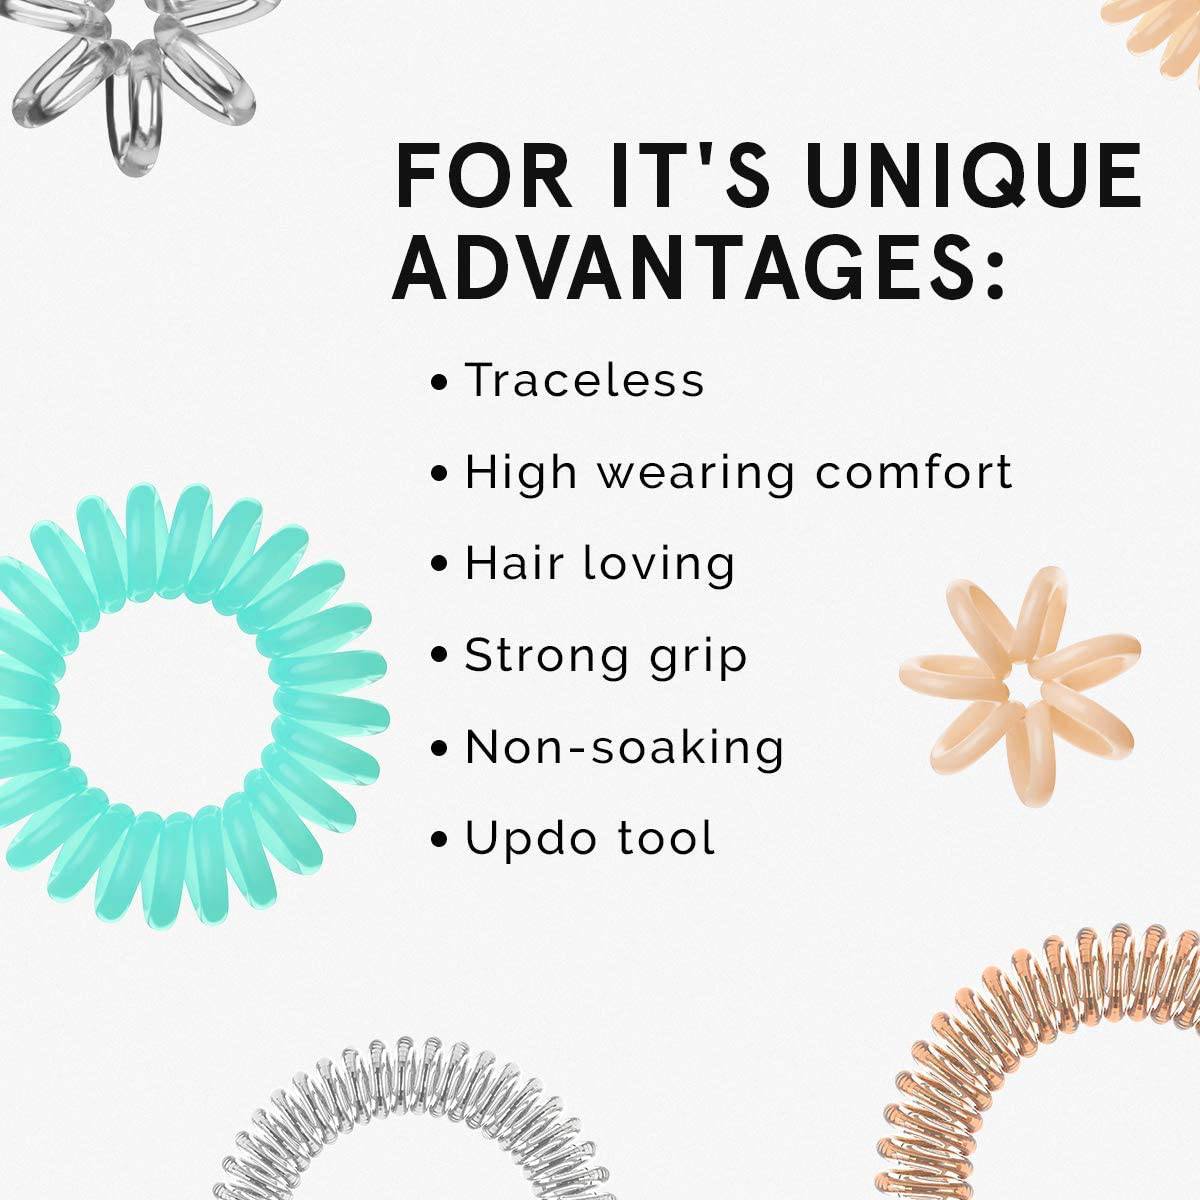 Invisibobble ORIGINAL Hair Ties, Crystal Clear, 3 Pack - Traceless, Strong Hold, Waterproof - Suitable for All Hair Types - Healthxpress.ie